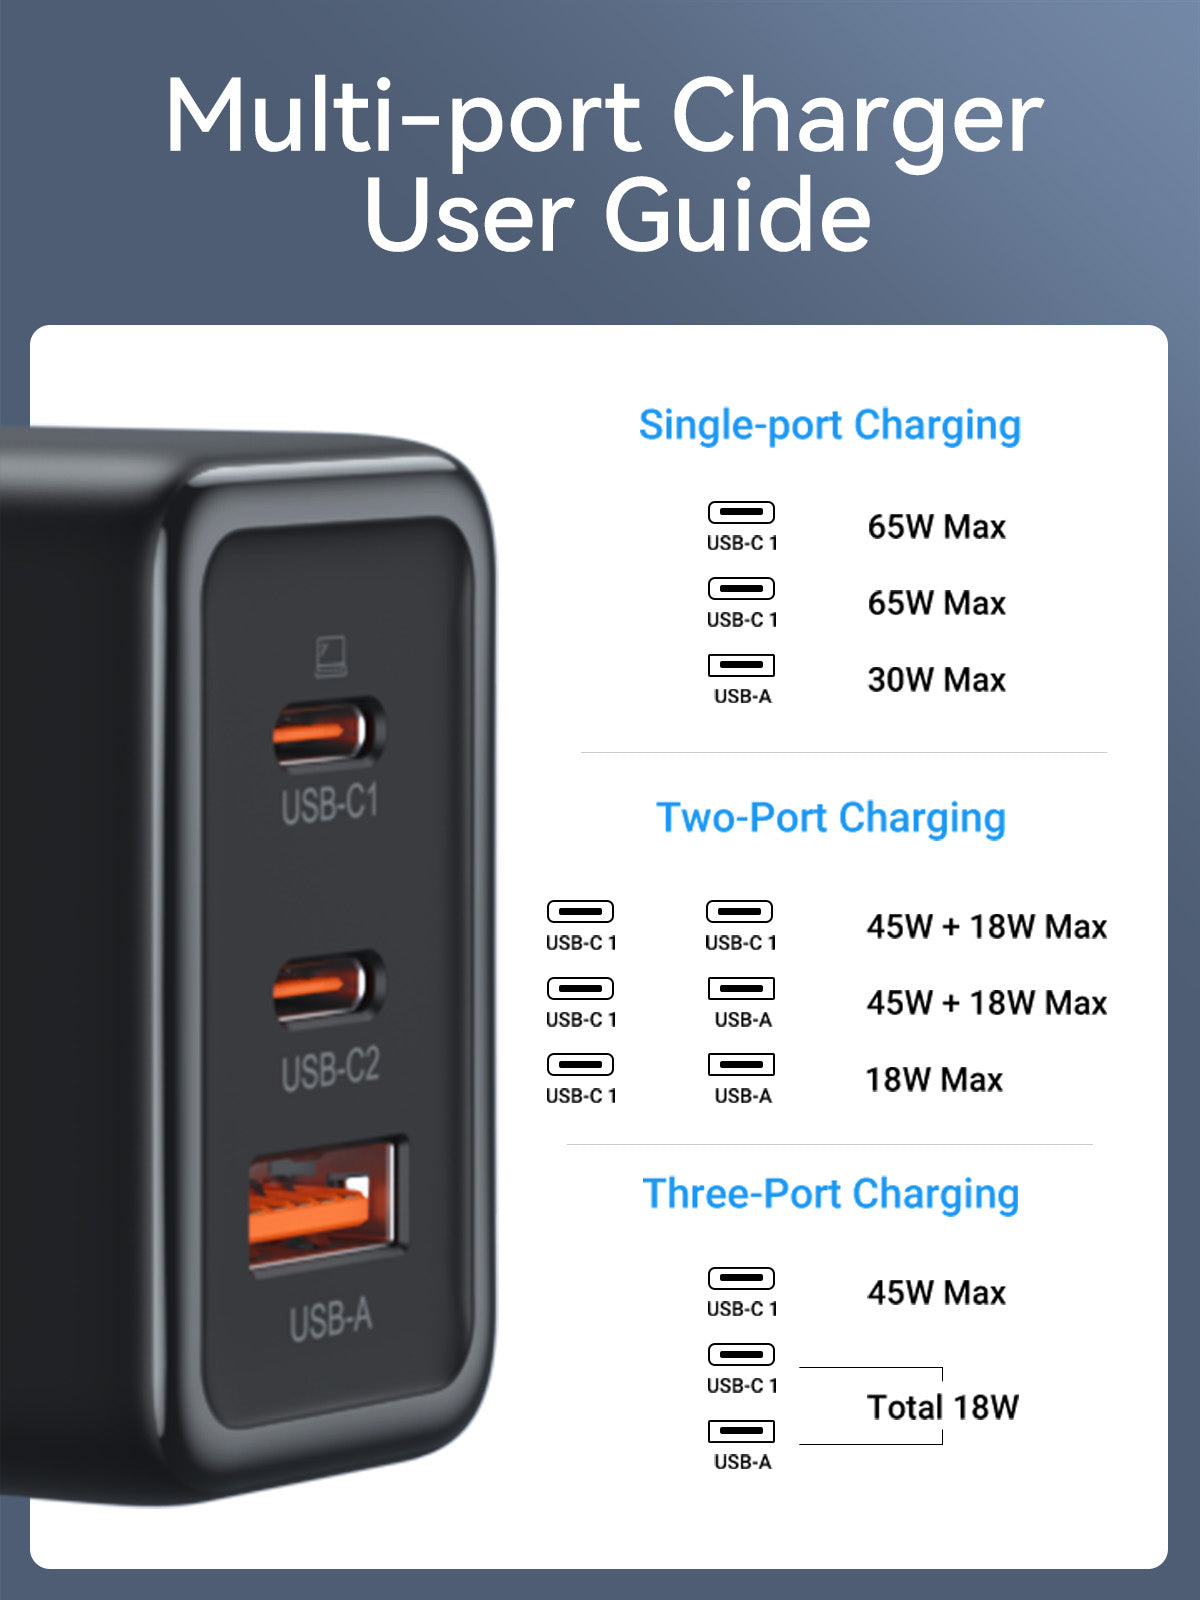 GMM 65W USB C Charger for iPhone/Laptops